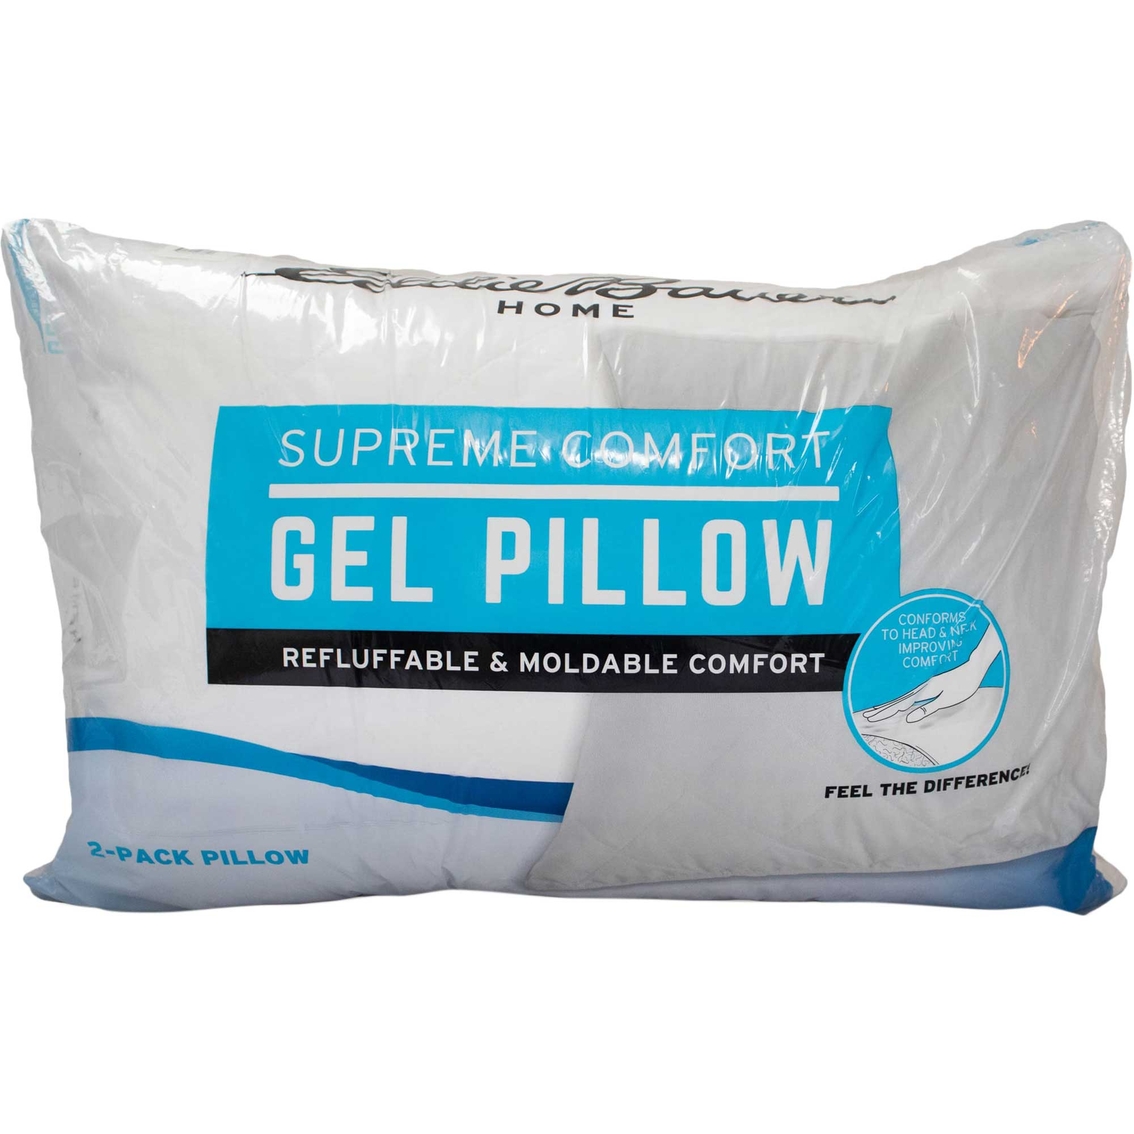 Eddie Bauer Quilted Gel Pillow 2 pk. - Image 6 of 7